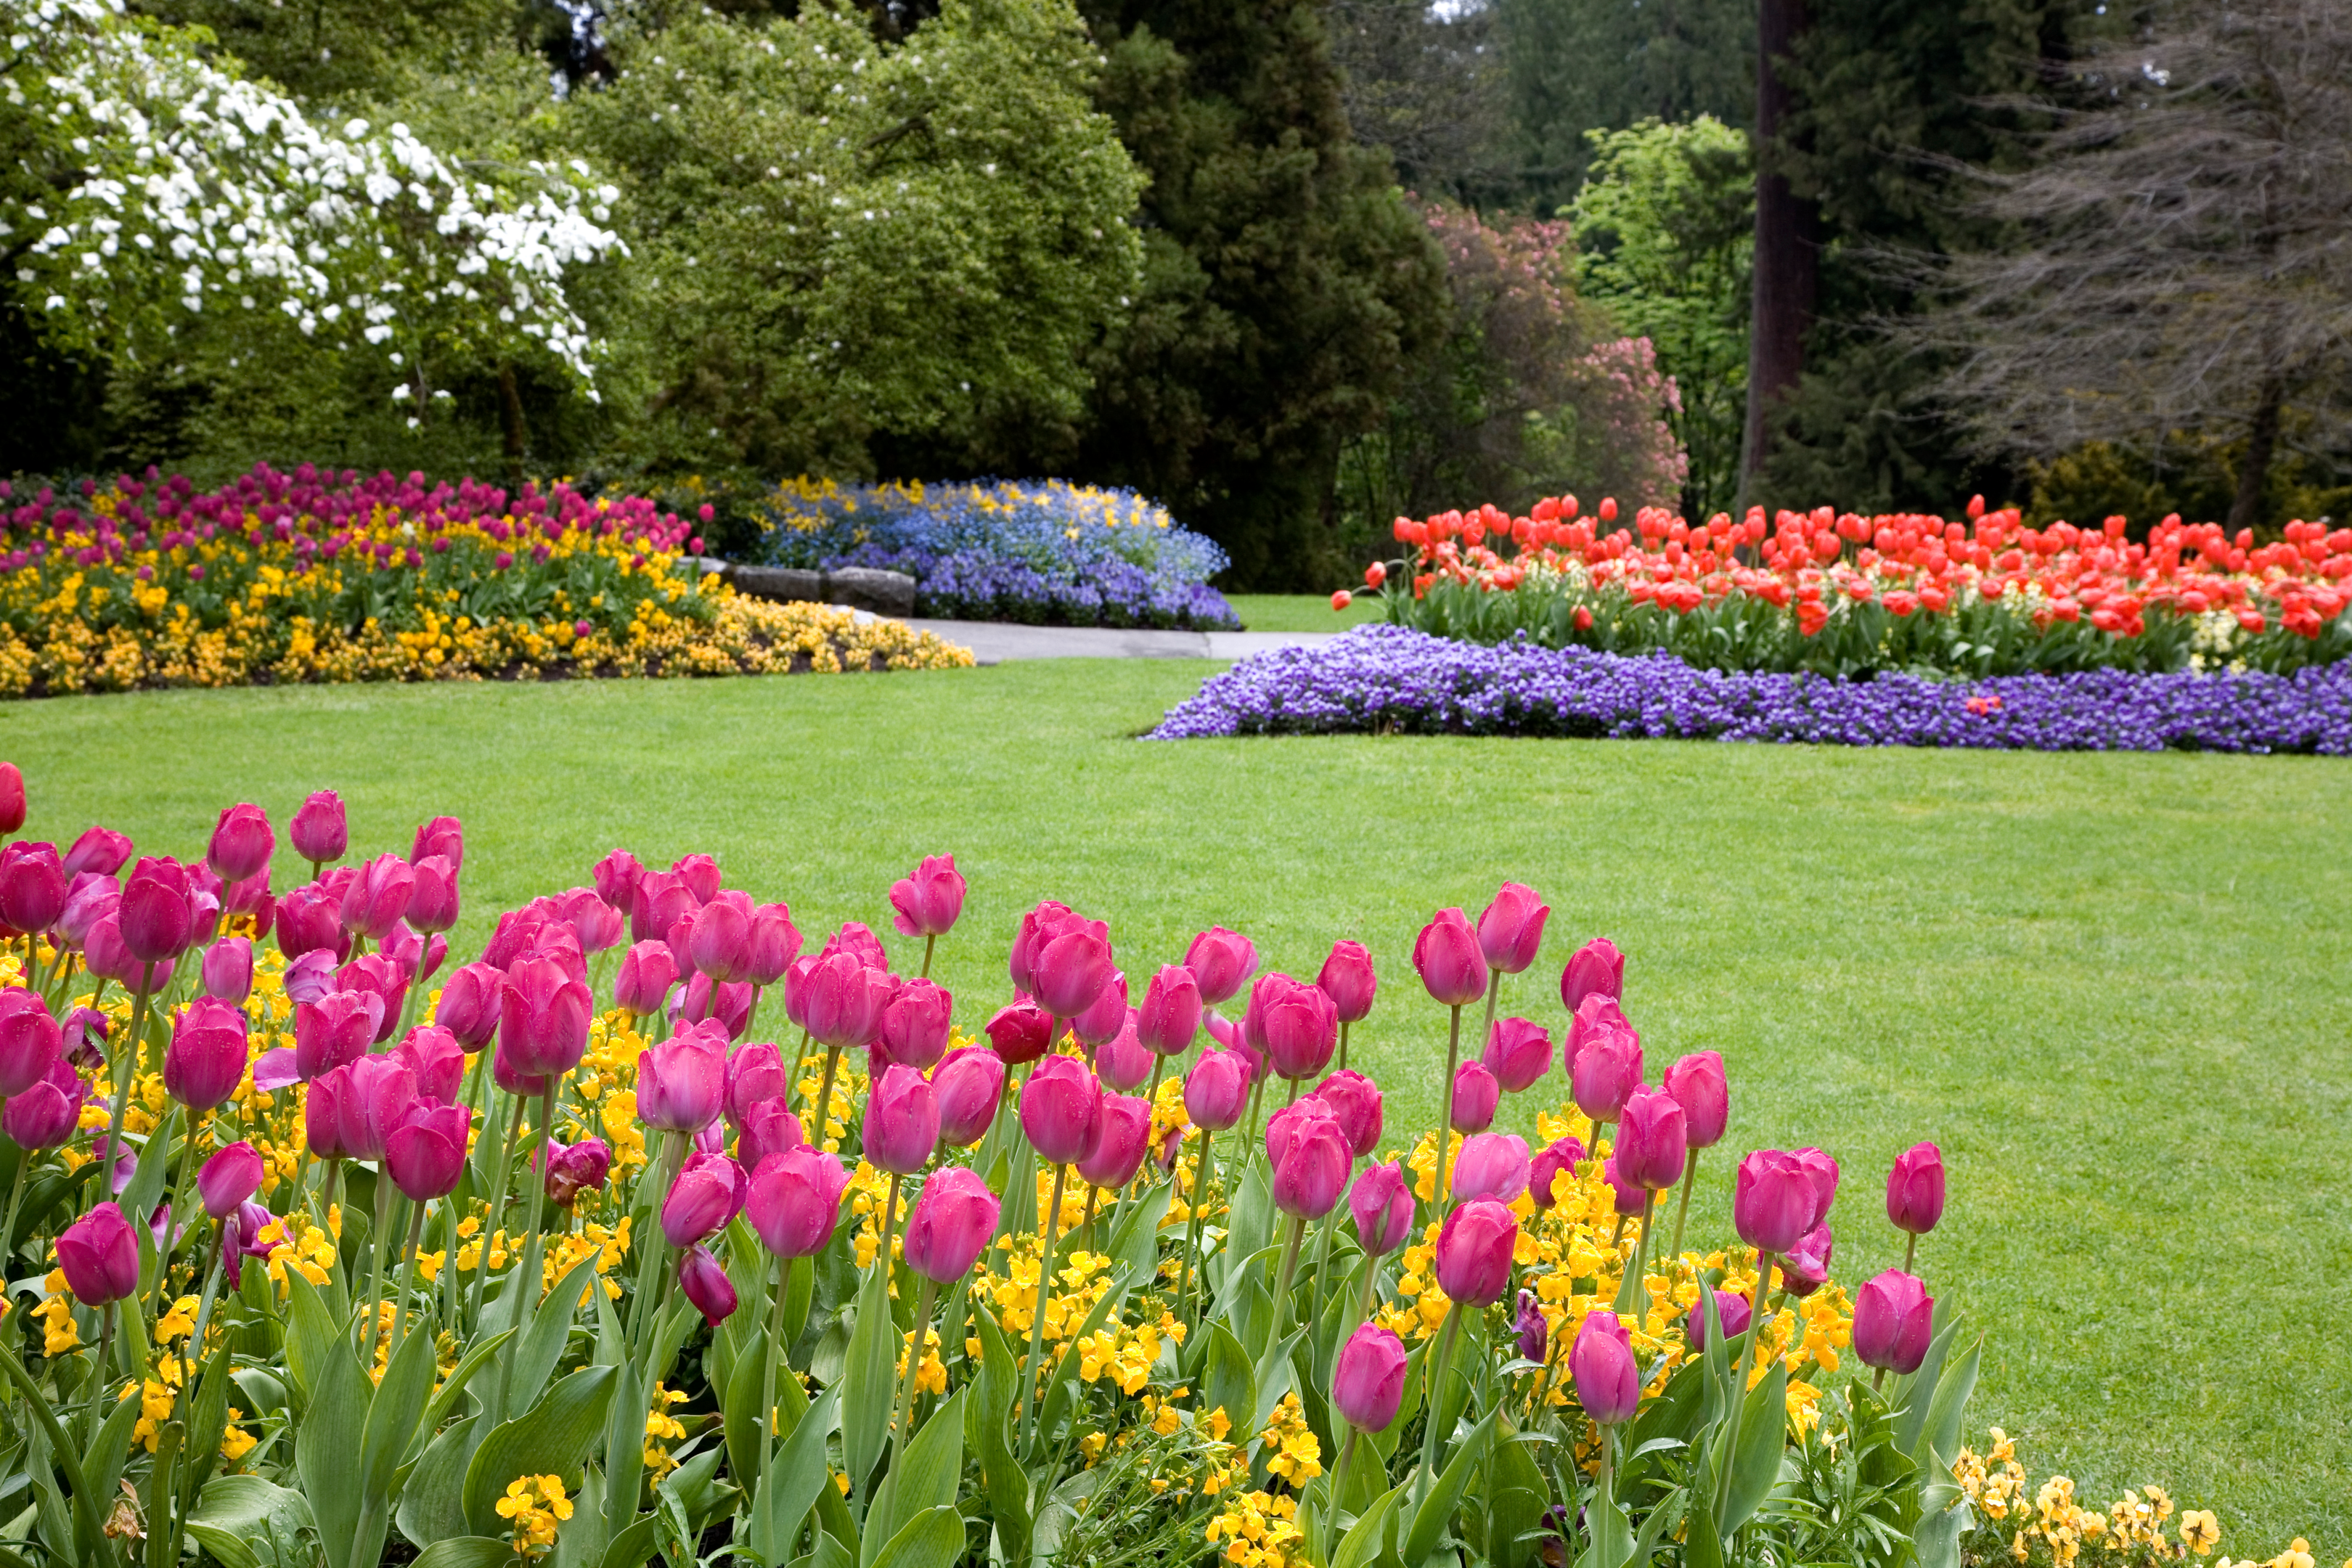 Colorful garden with flowers and a green lawn